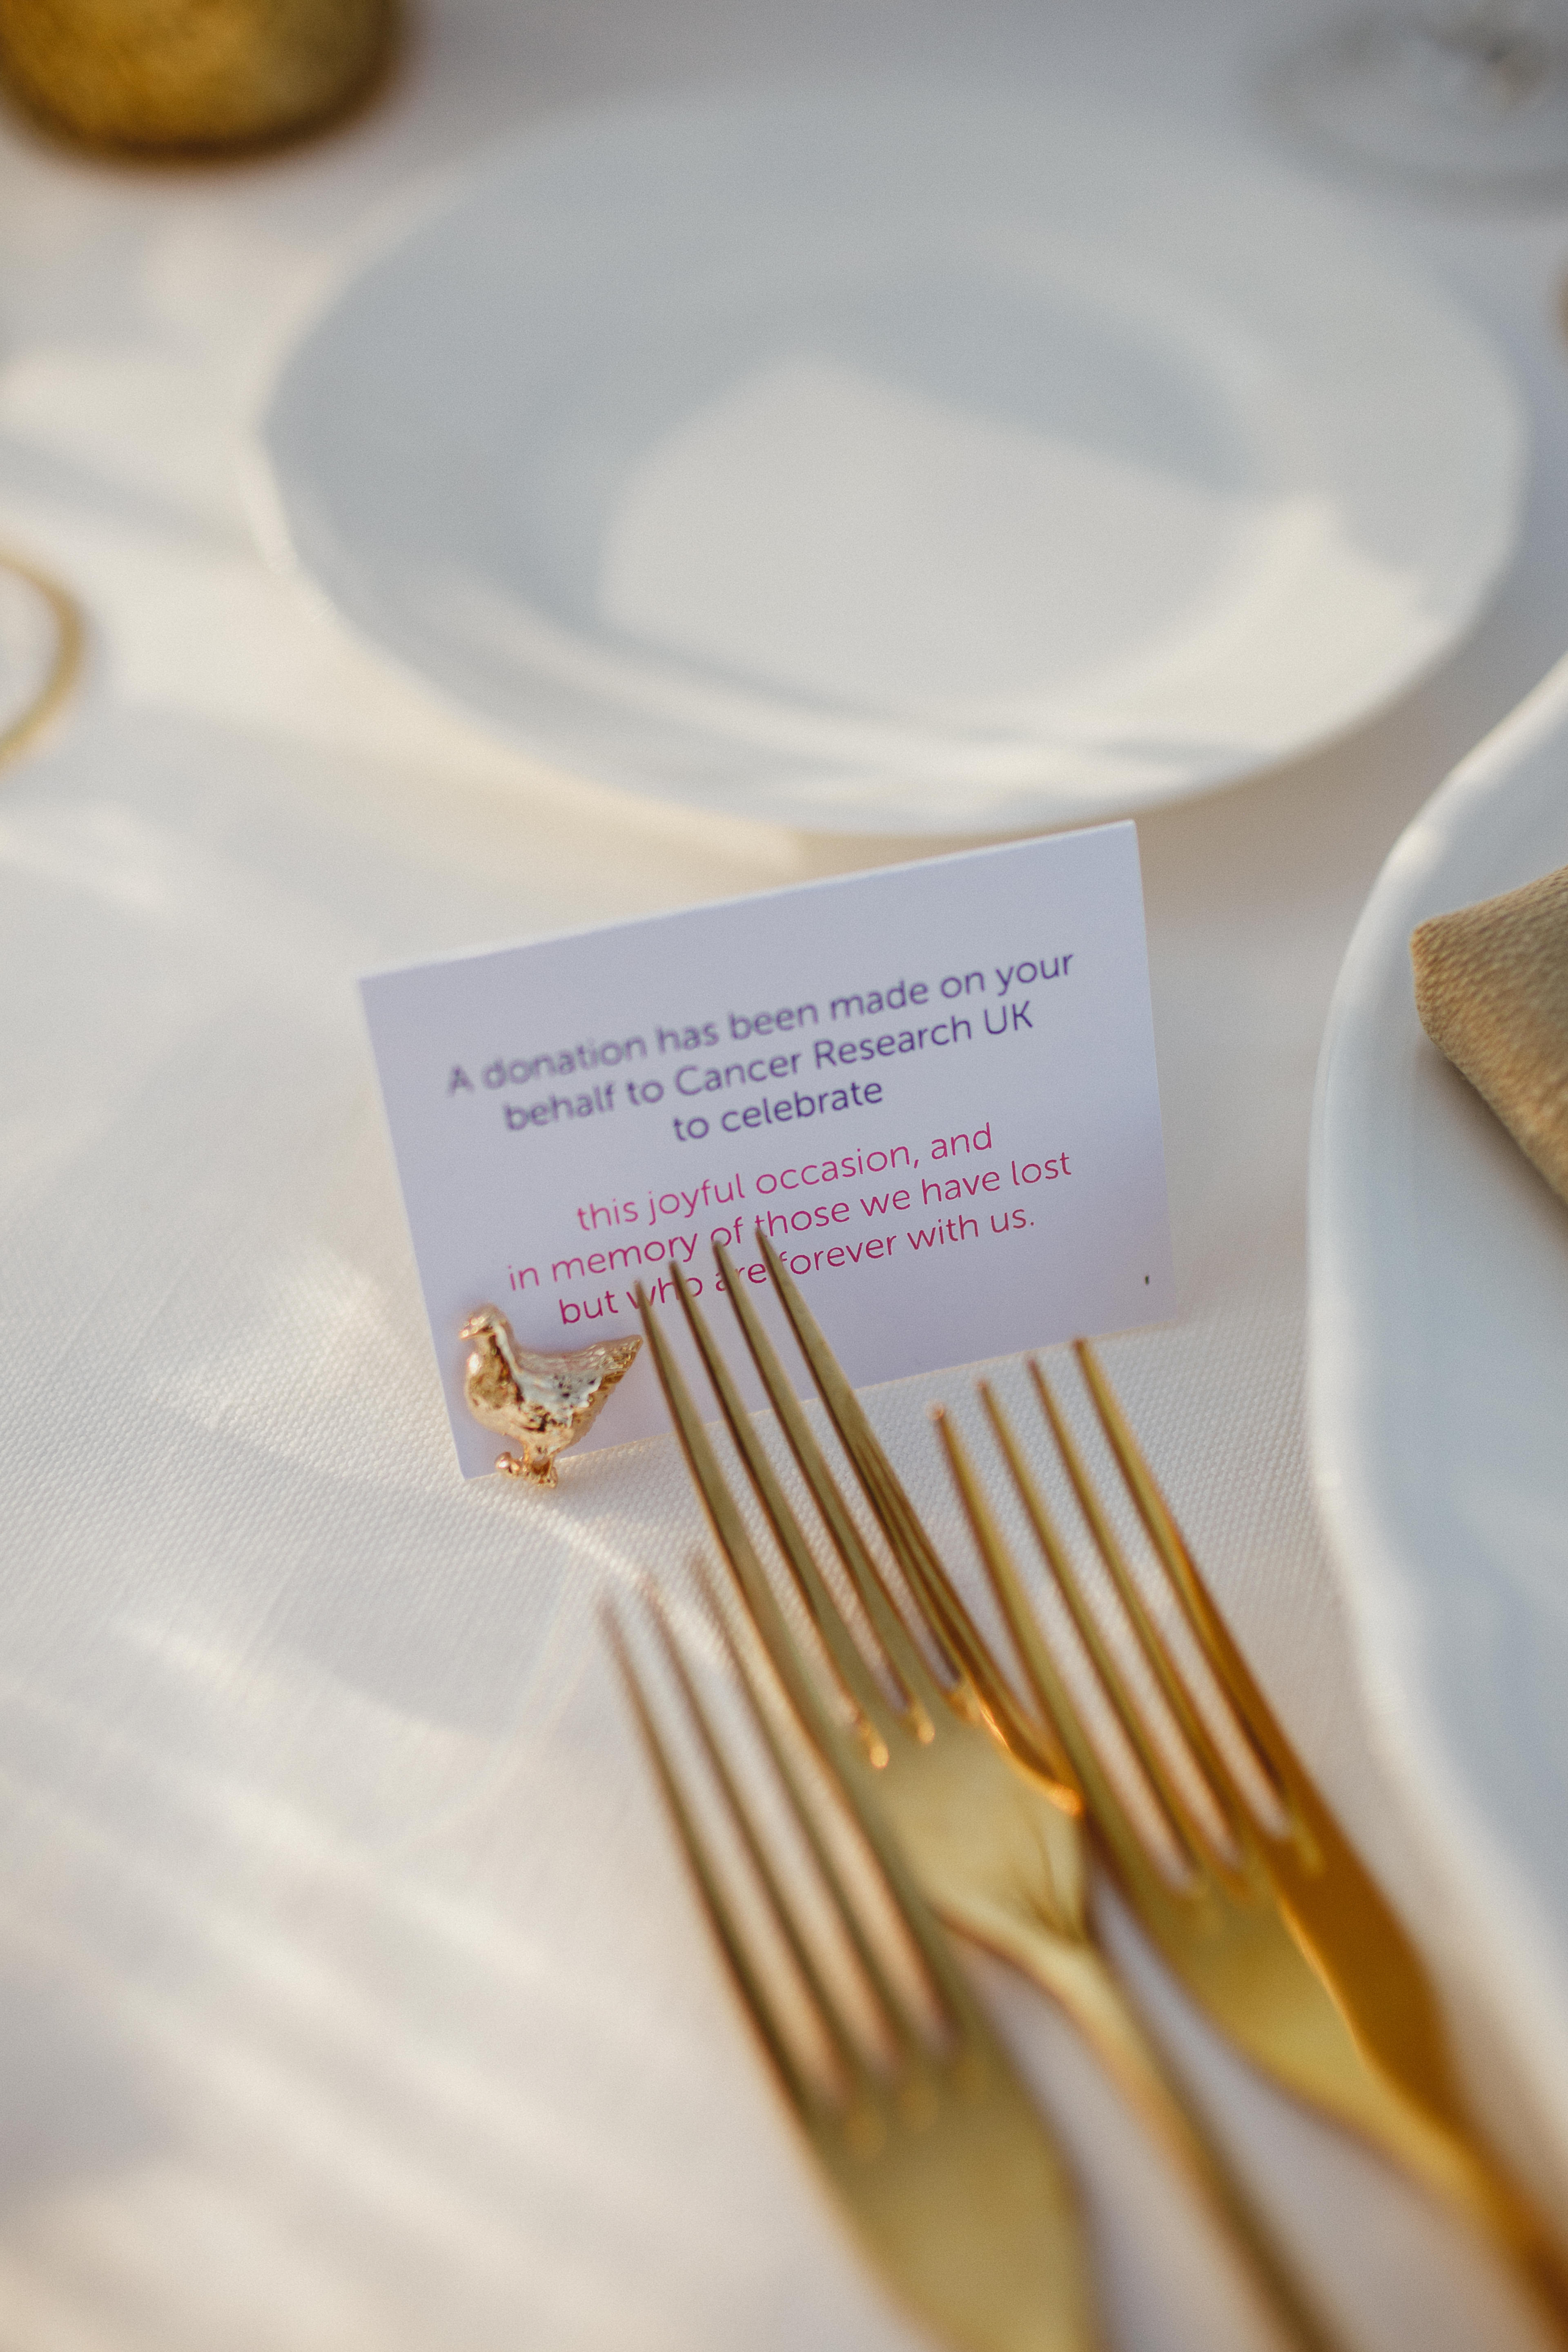 Cancer Research Charity Wedding Favours